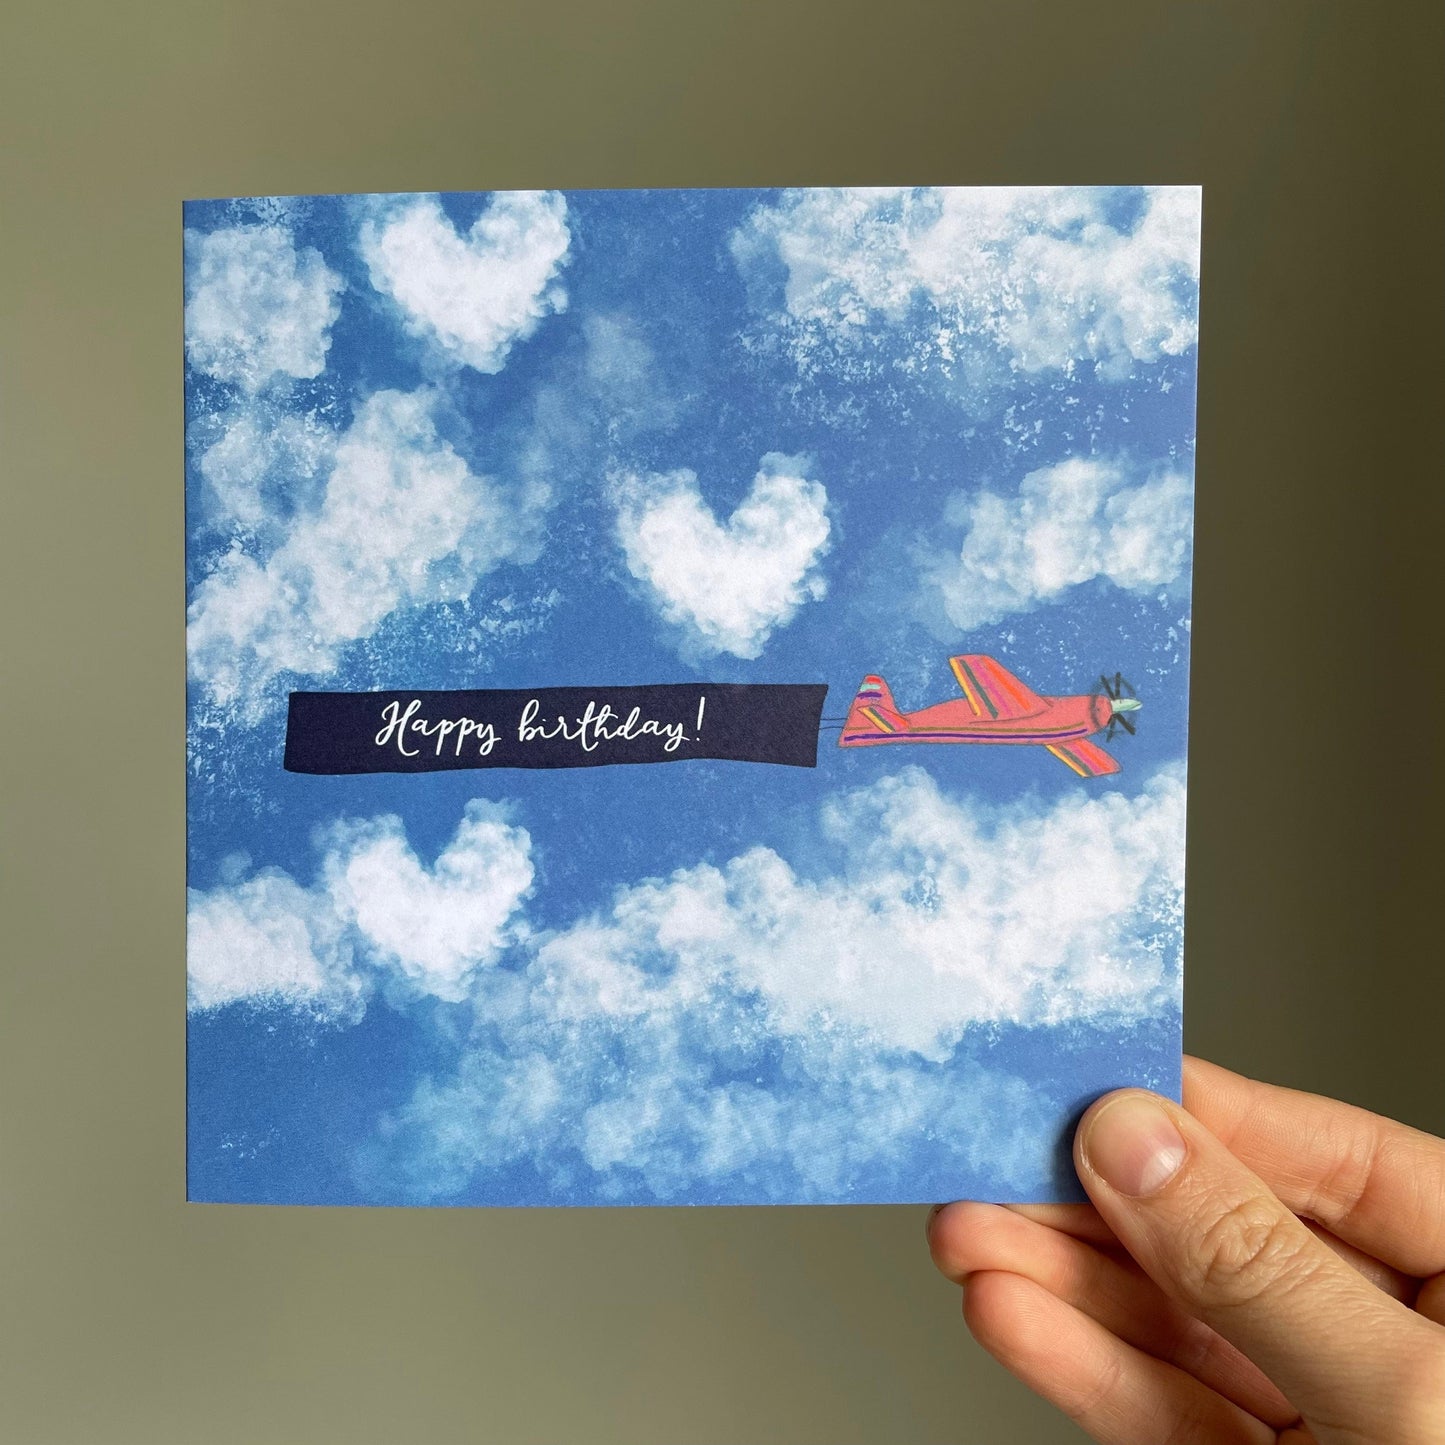 And Hope Designs Greeting & Note Cards Aeroplane message happy birthday card